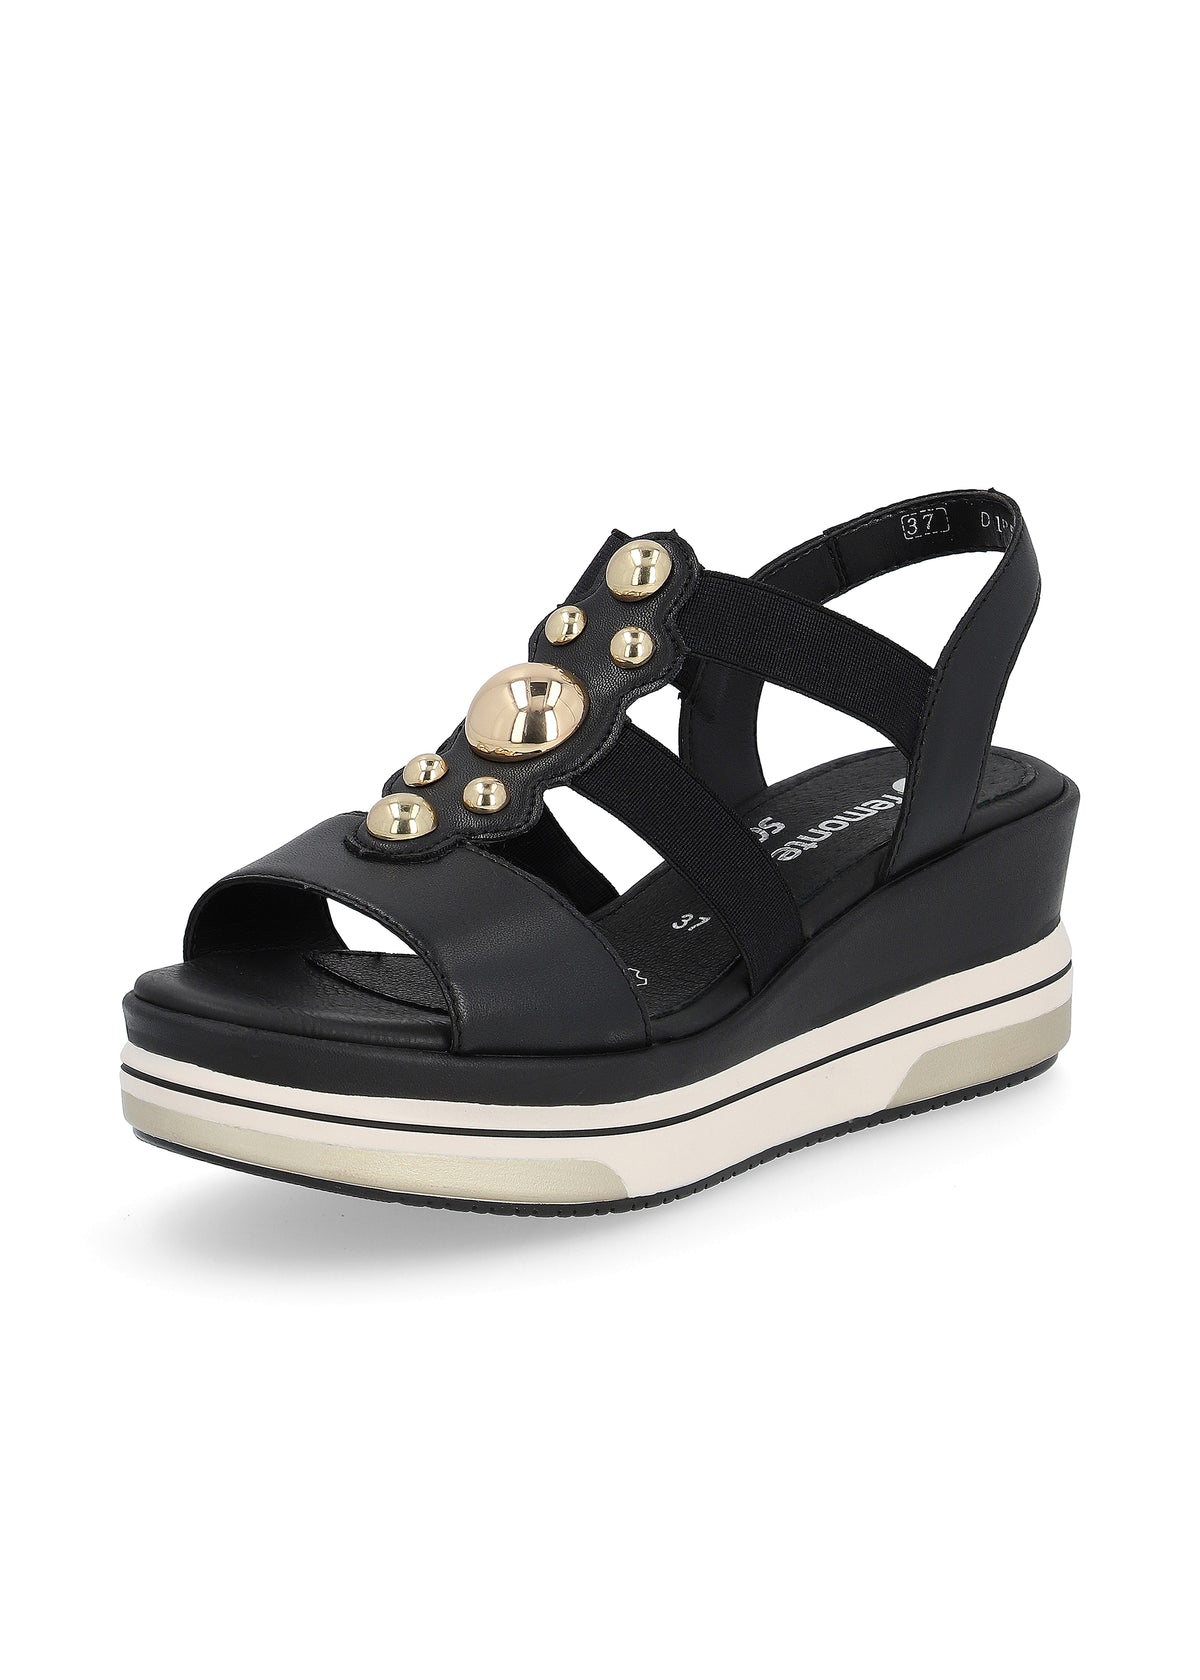 Sandals with a wedge sole - black, gold decorations